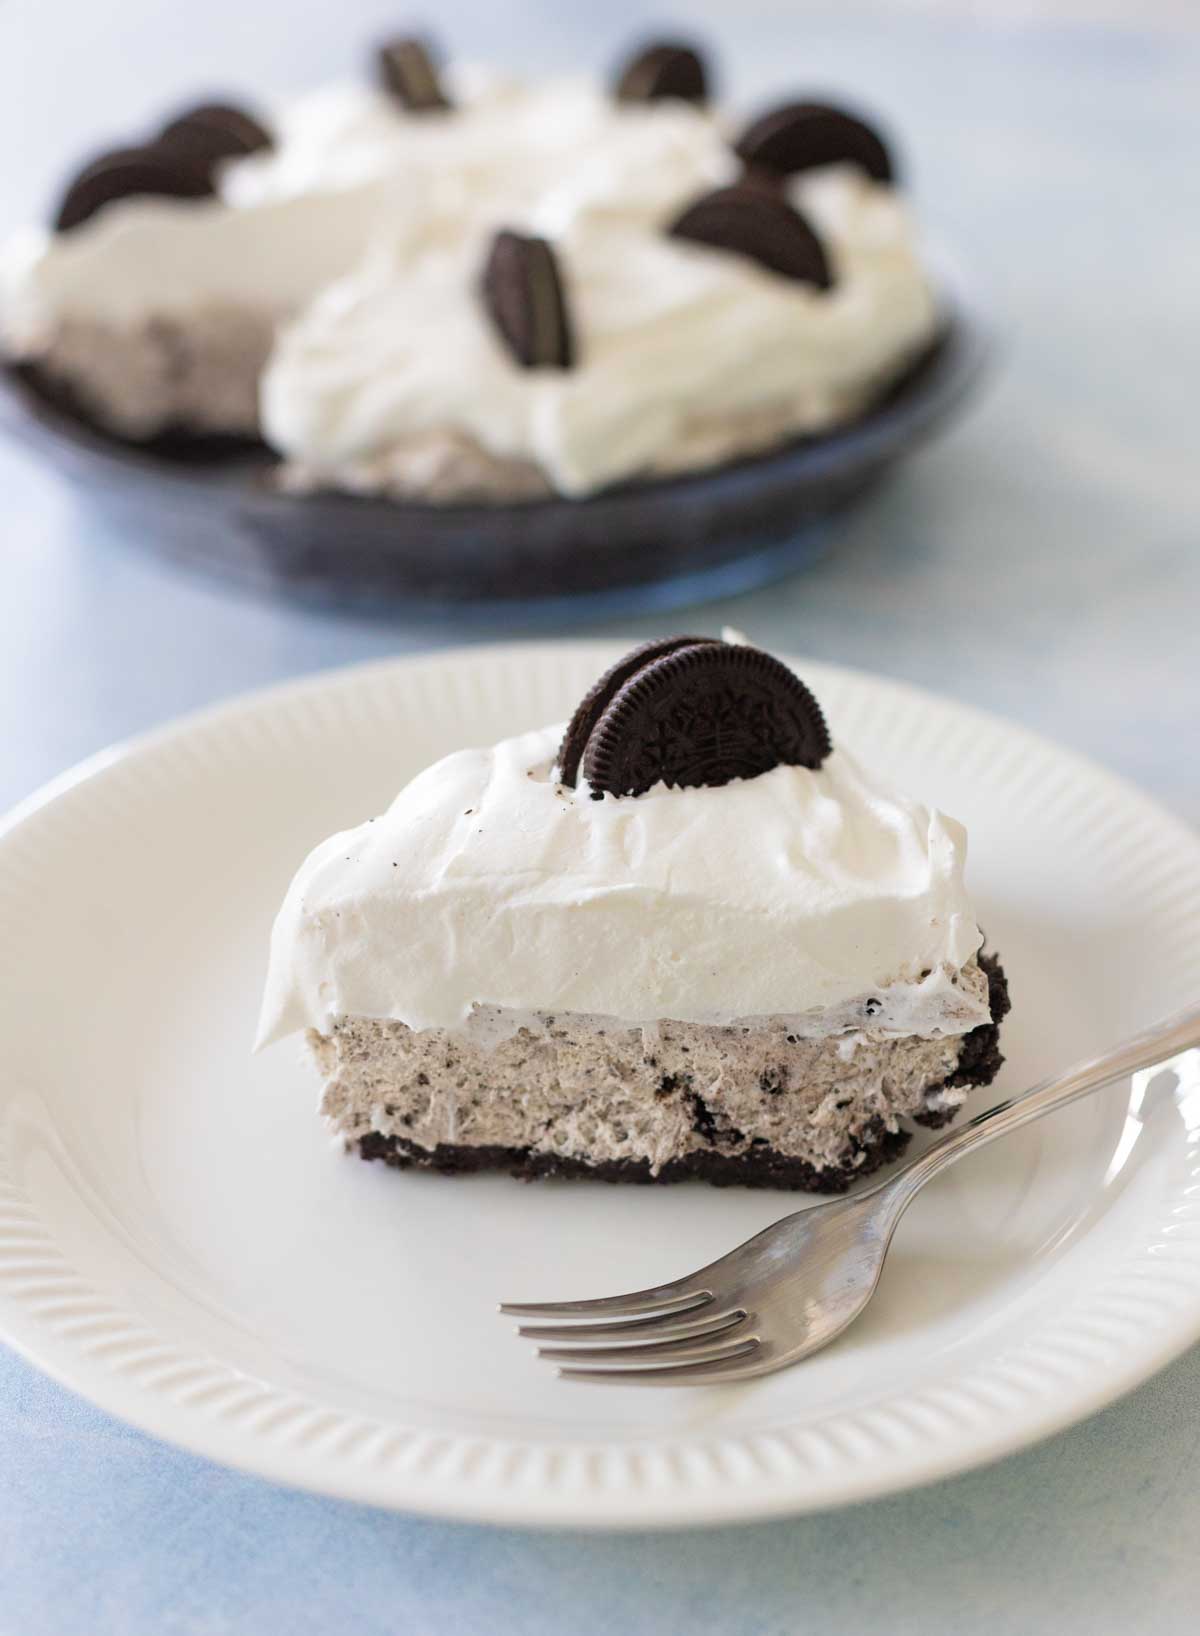 A slice of Oreo cream pie is on a white plate, the rest of the pie is in the background.